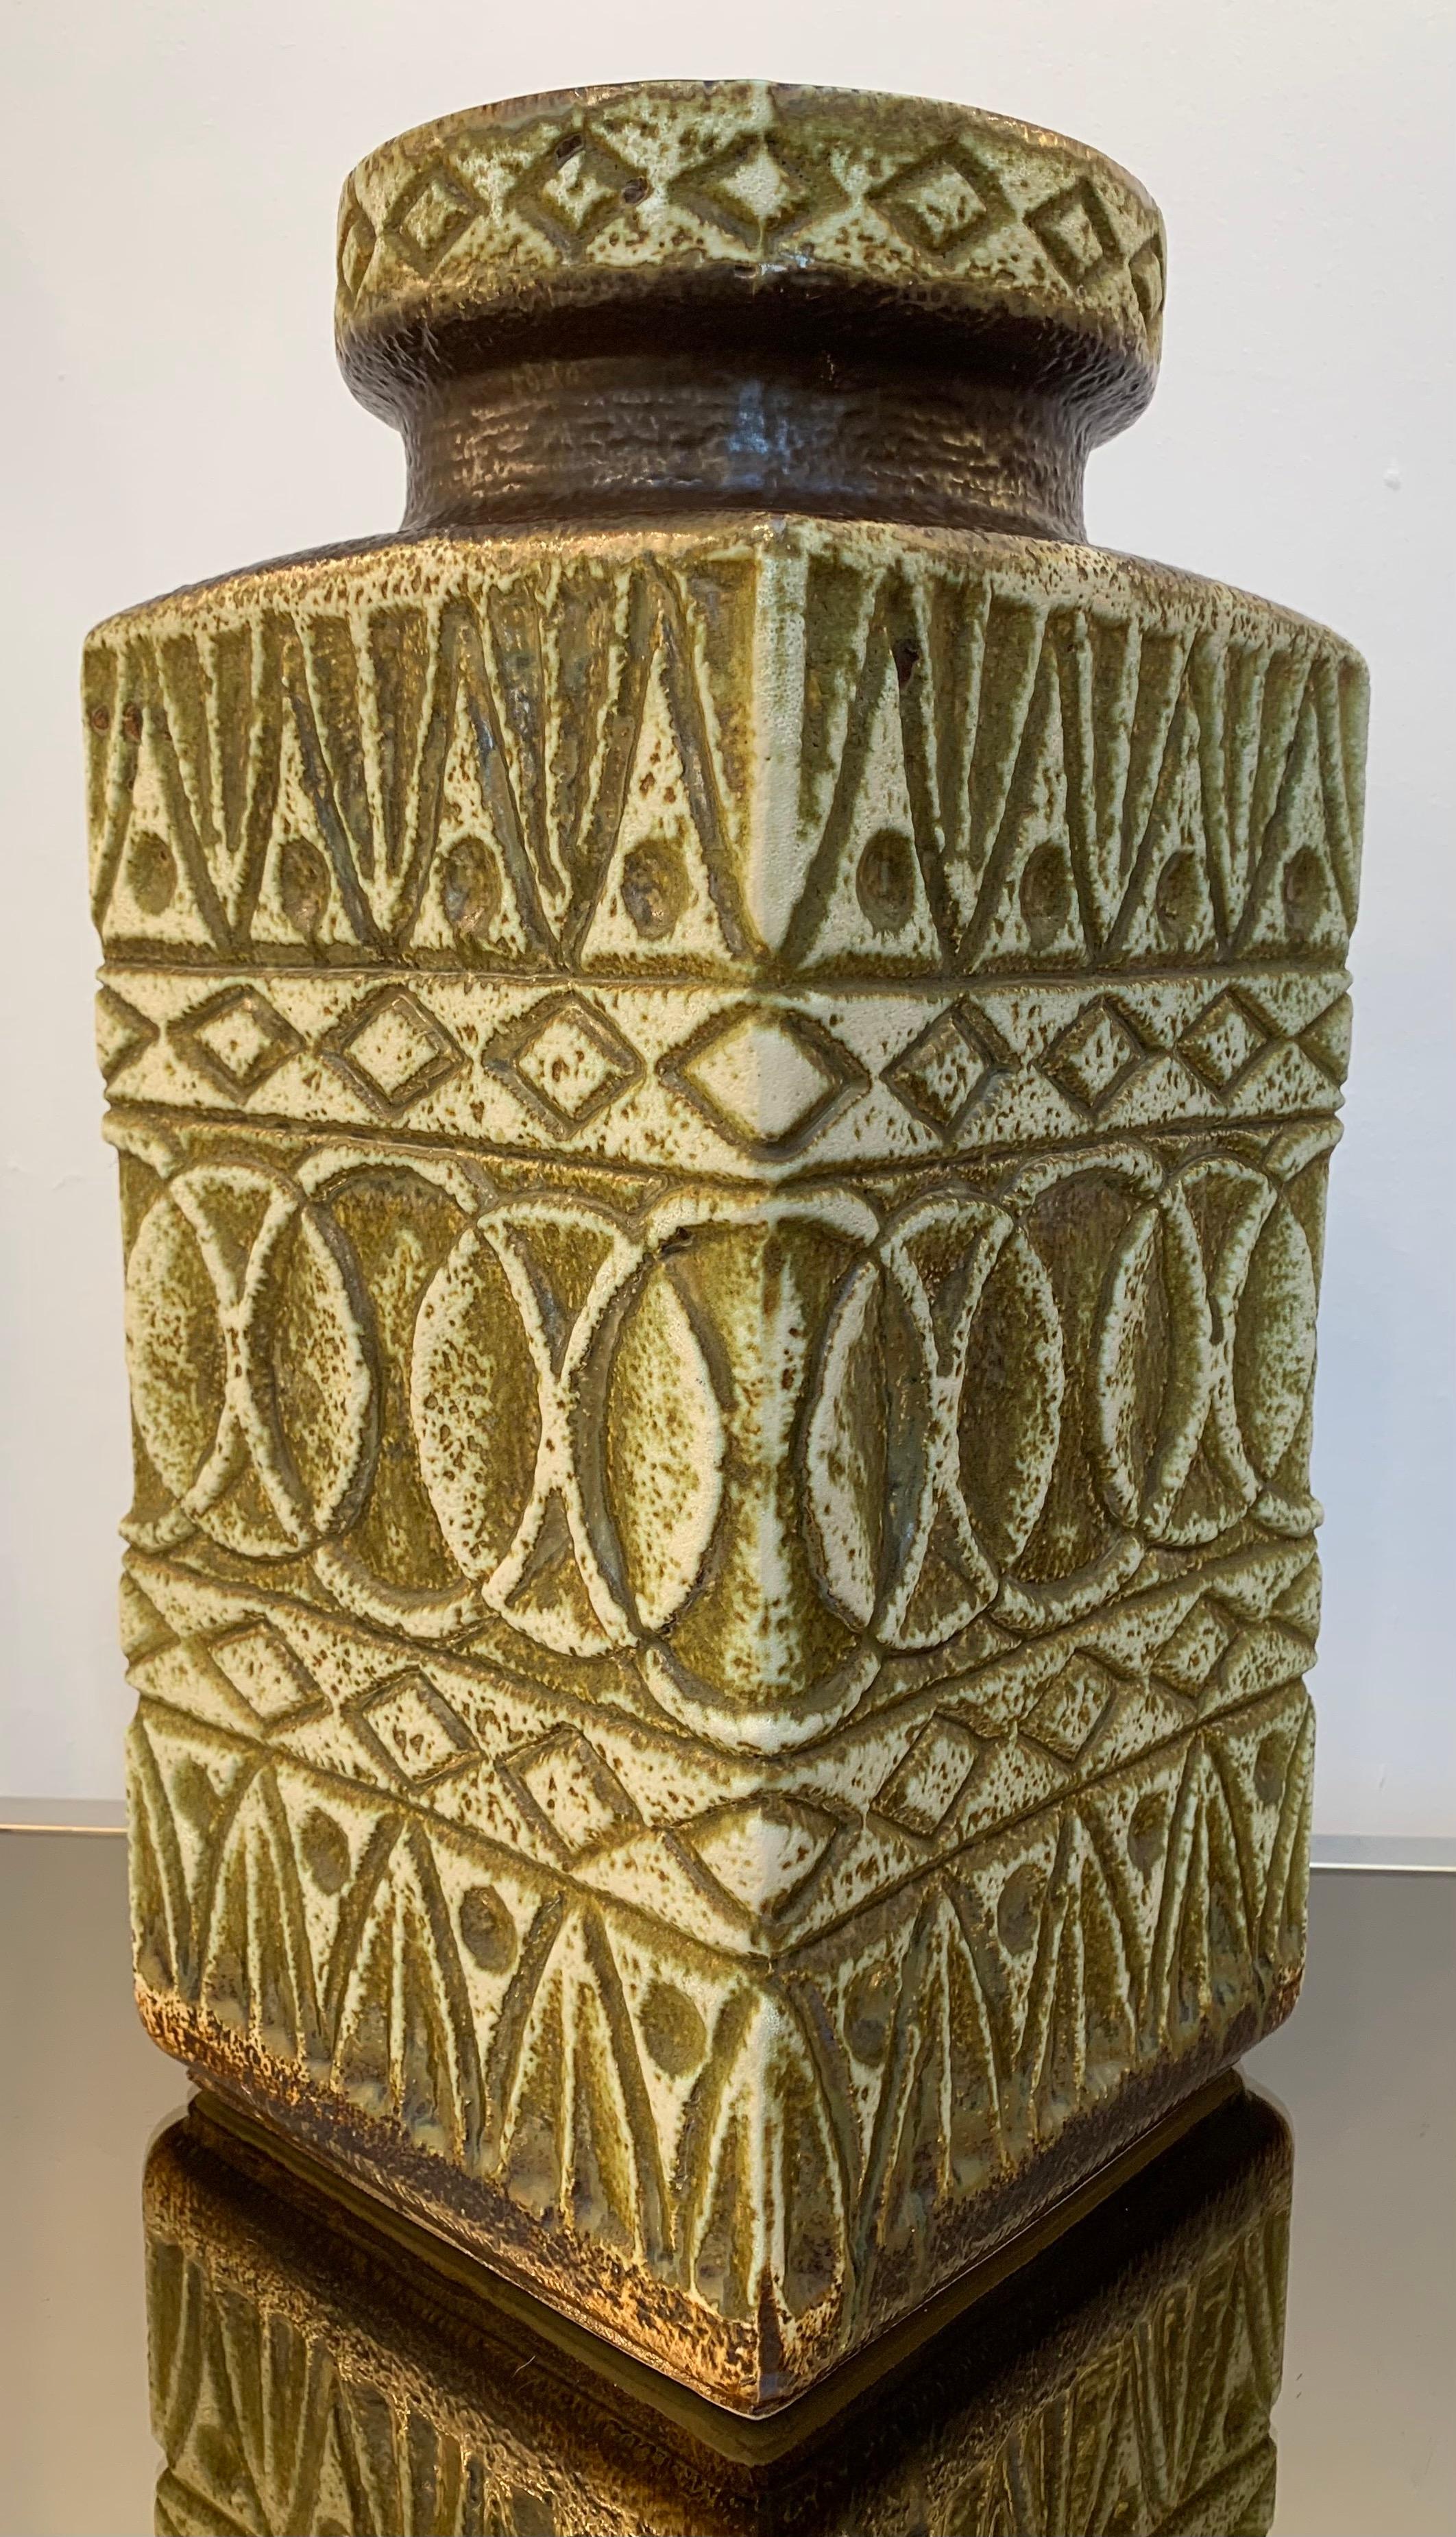 Unglazed 1970s German Fat Lava Bay Ceramics Pottery Abstract Vase by Bodo Mans 92 45 For Sale